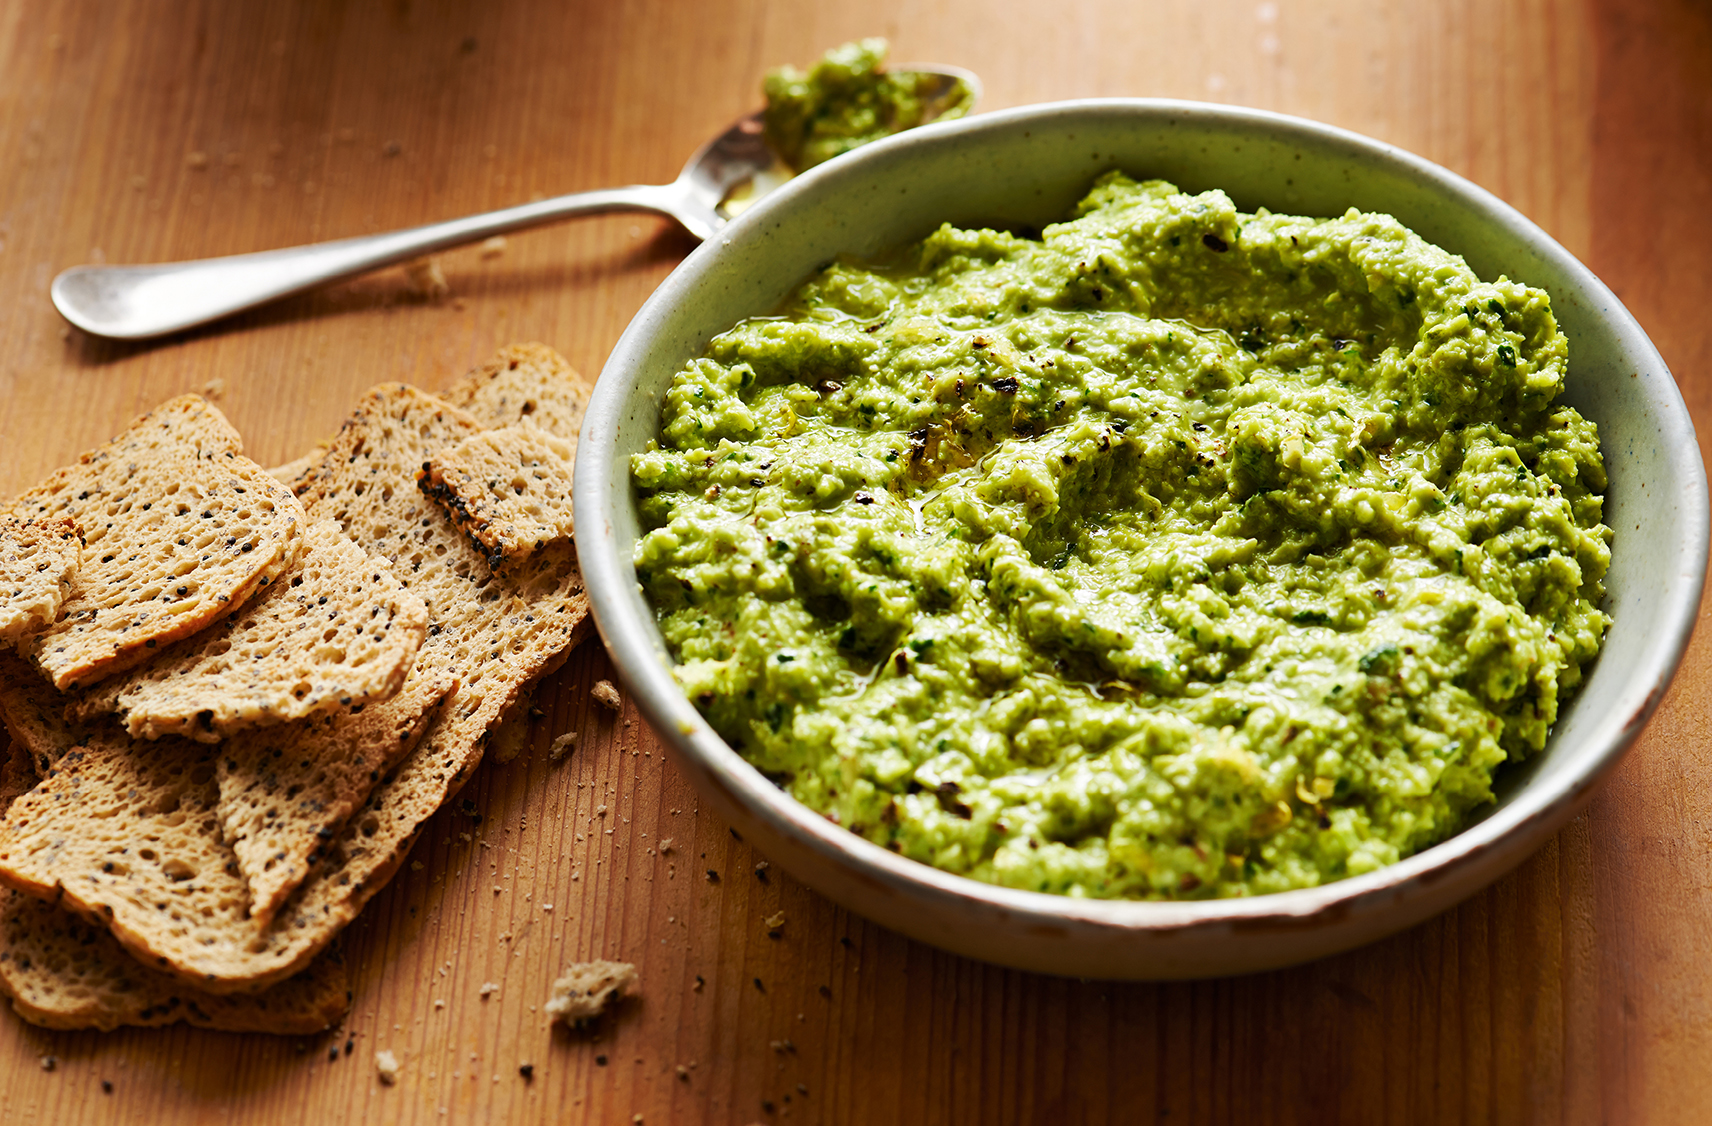 green hummus served in a small grey bowl with slices of dry toast on the side for dipping